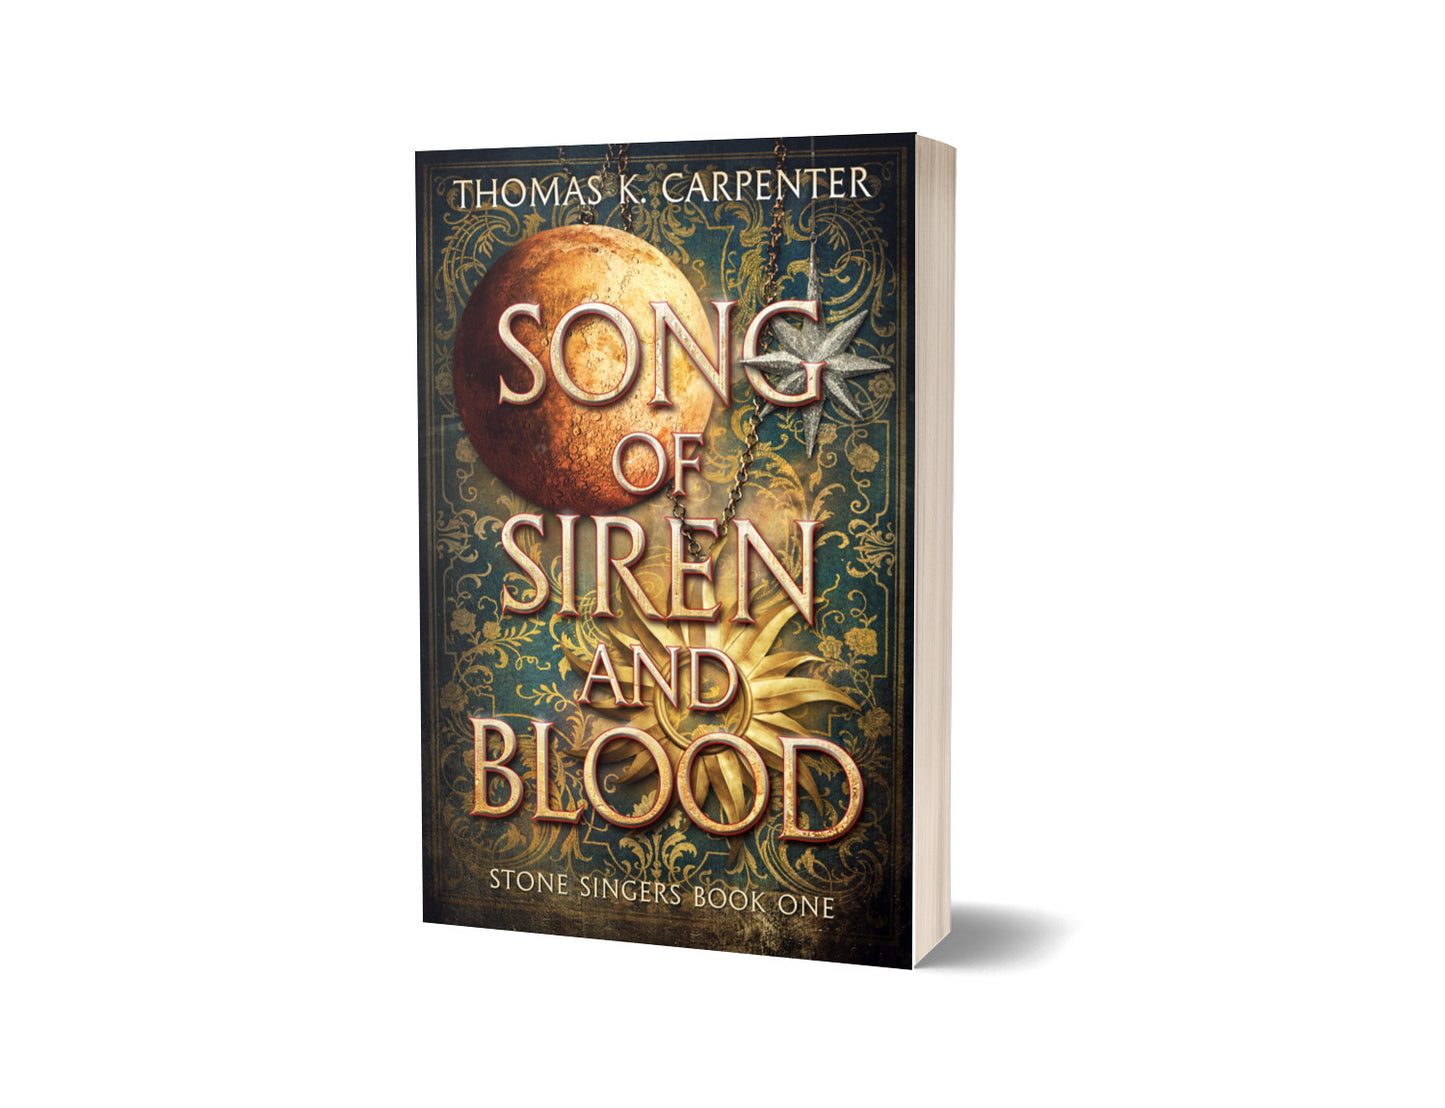 Song of Siren and Blood